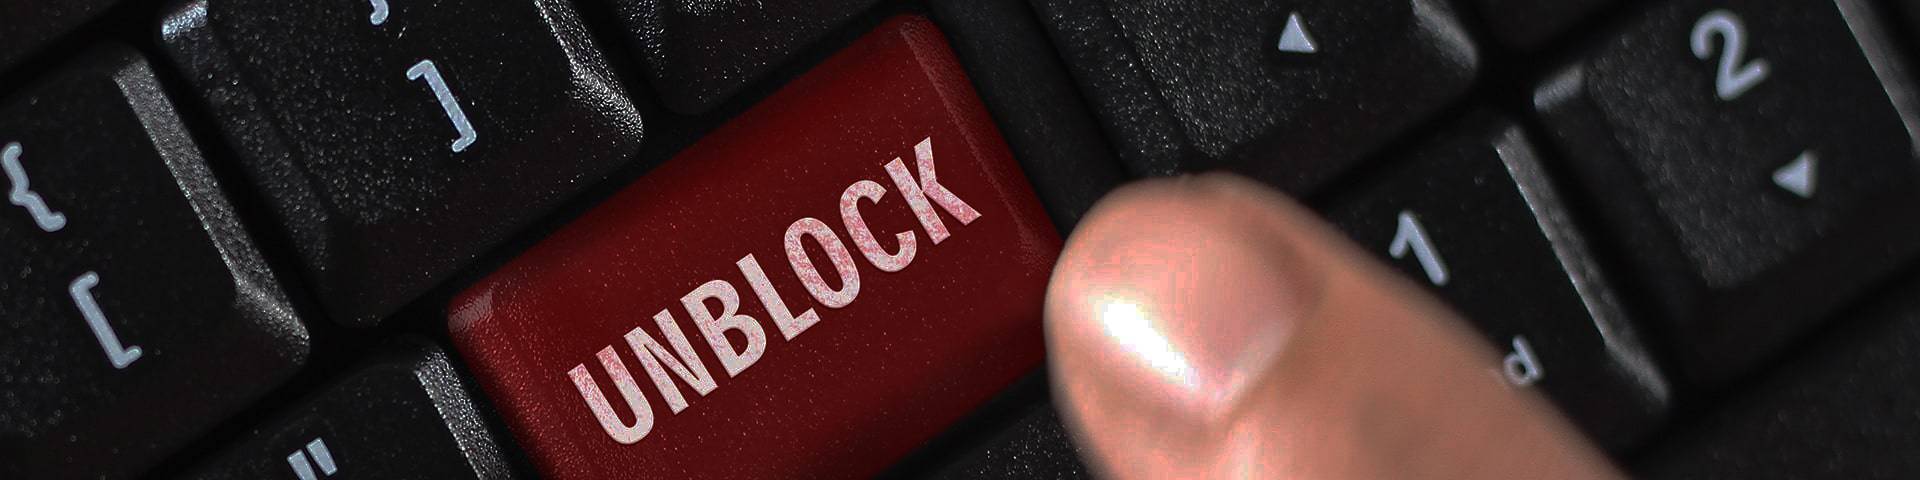 How to Unblock Someone on Instagram: Even Those, Who Blocked You